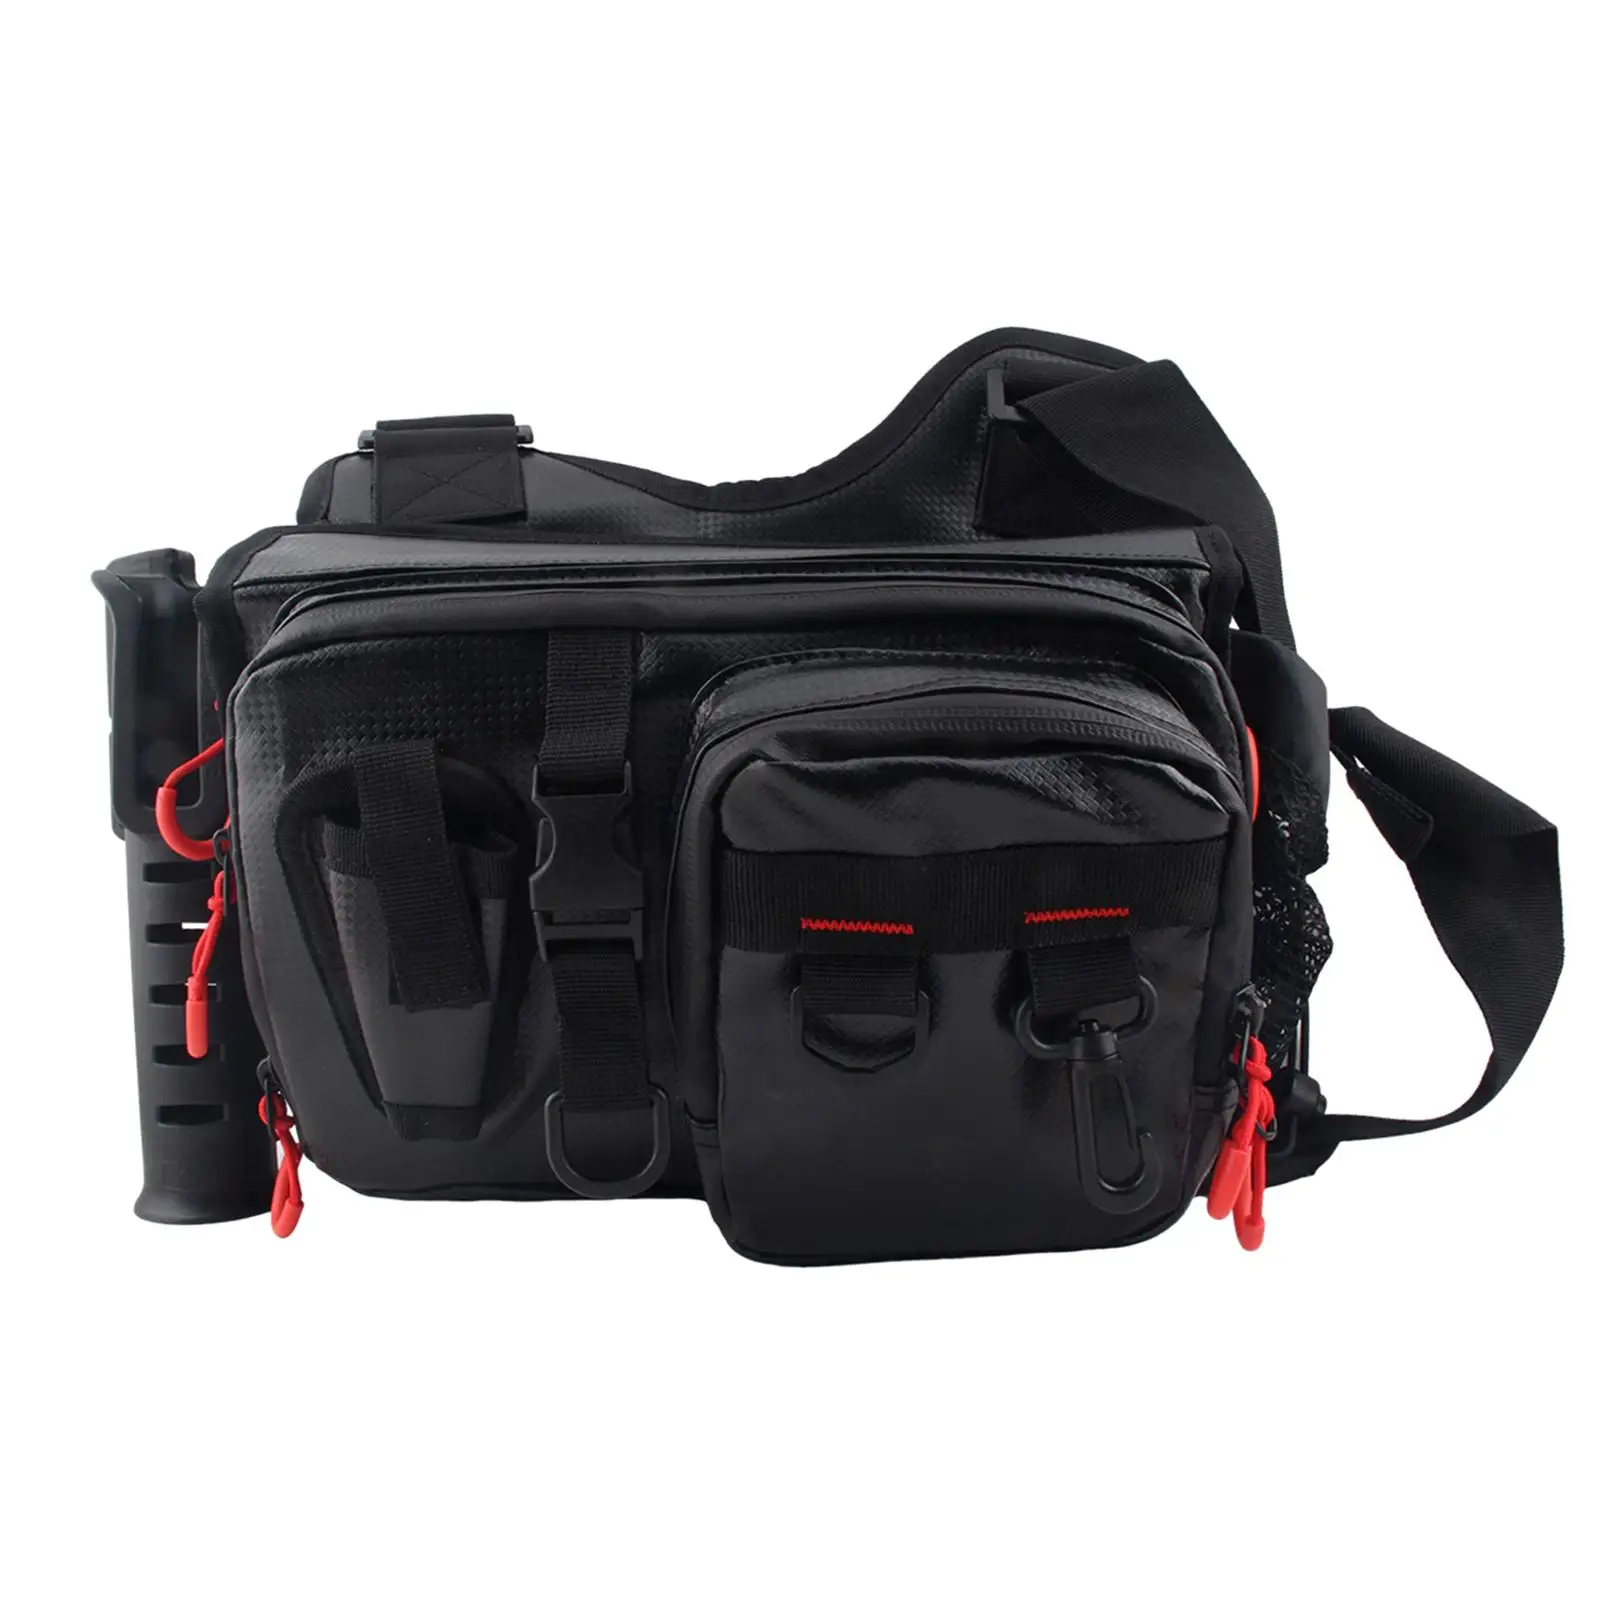 Lure Bags Wear Resistant Large Capacity Supplies Durable Resistant Fishing Bag Fanny Pack for Outdoor Fishing Hiking Camping Men